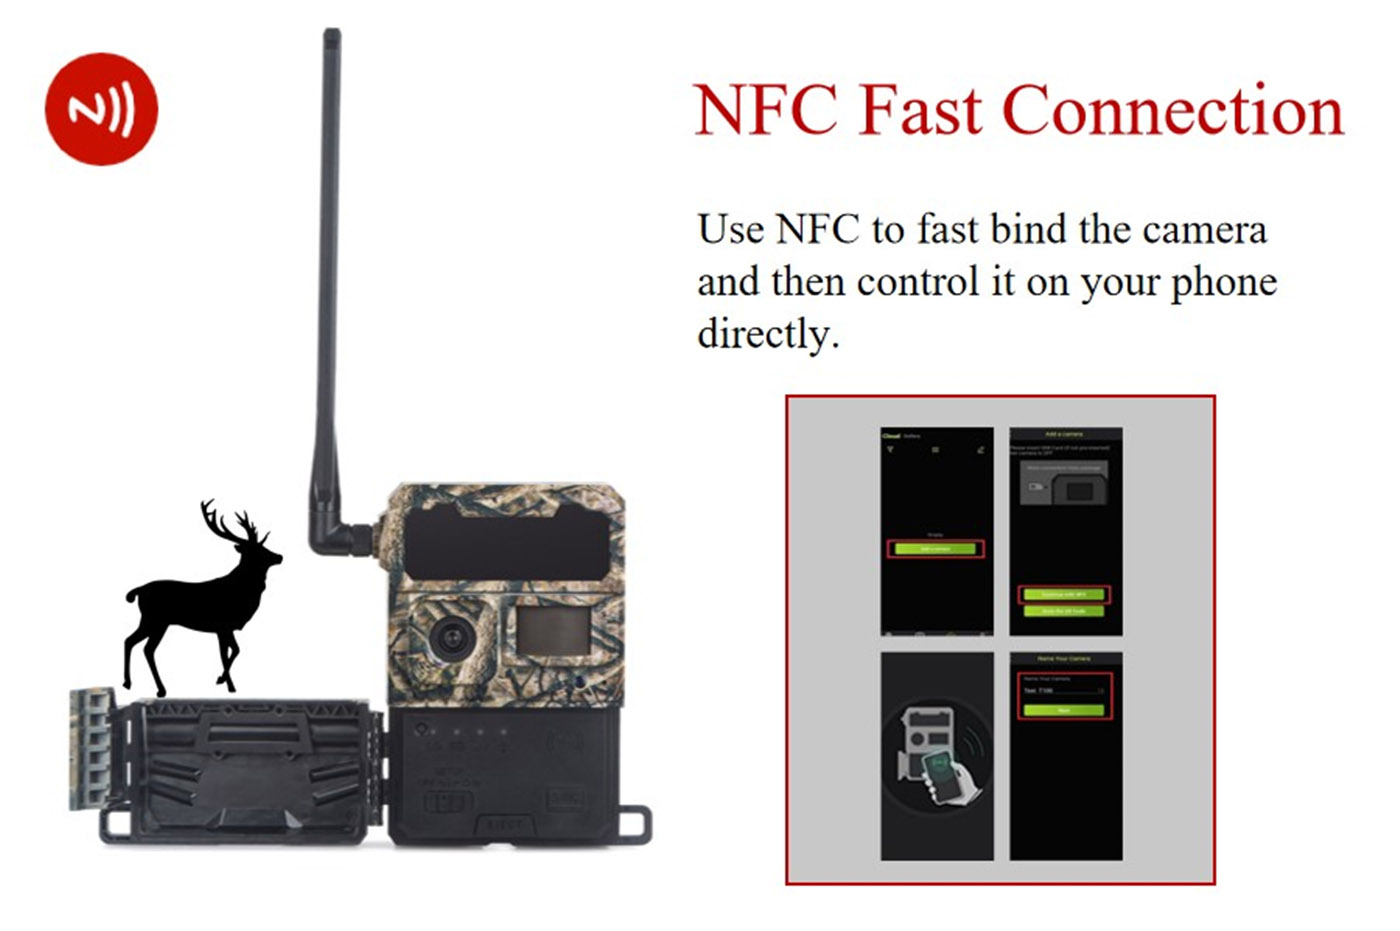 4G LTE network trail camera NFC connection APP remote control-02 (3)